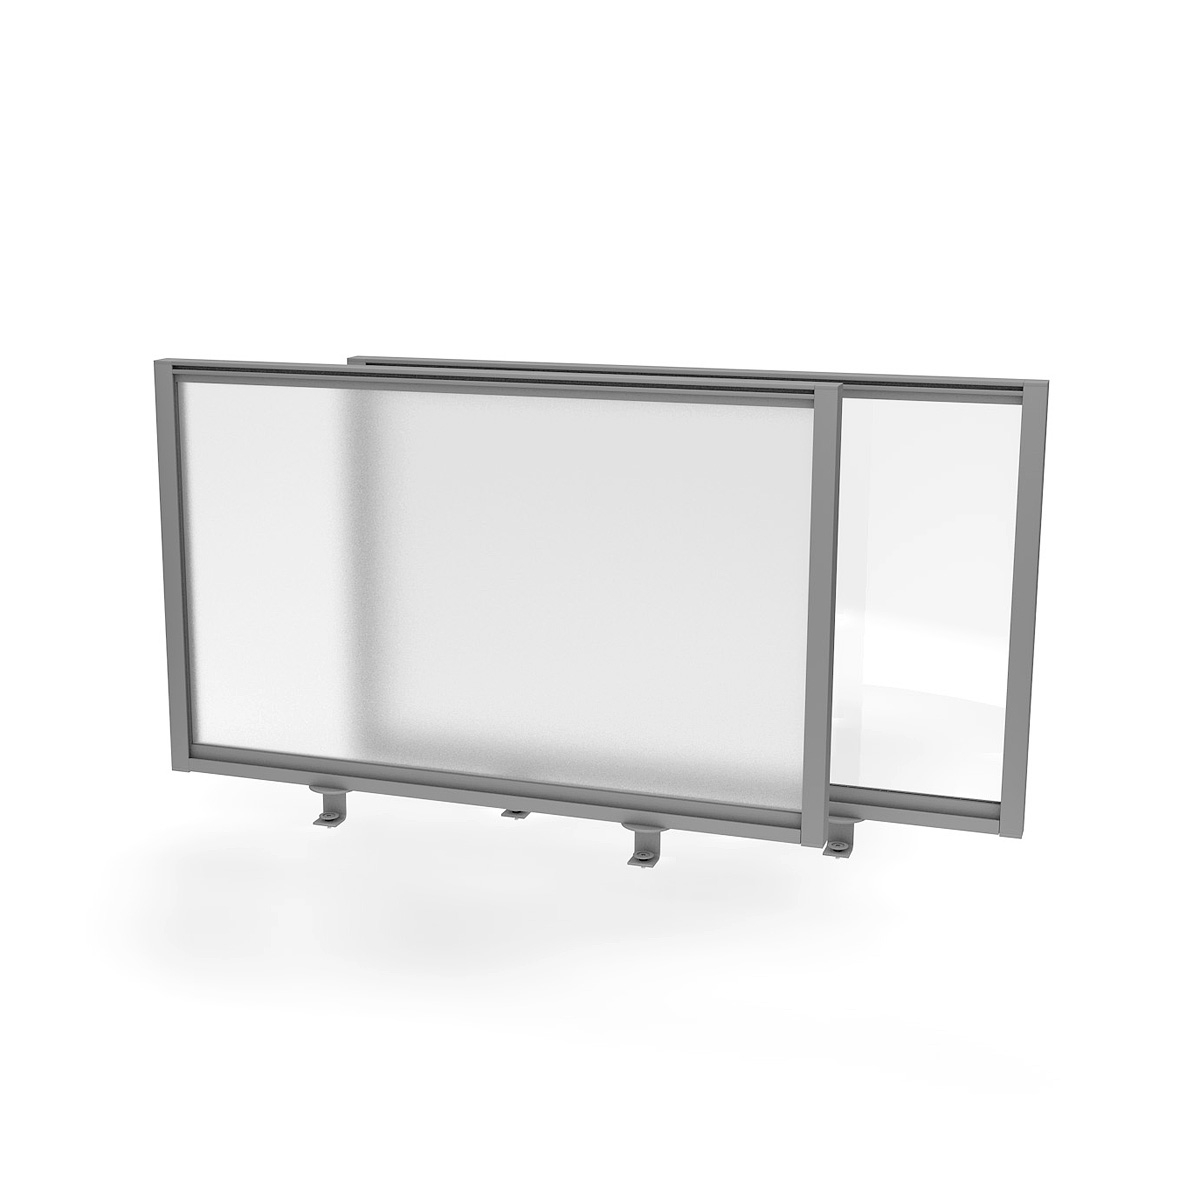 FRONTIER® Perspex Office Screen Desk Dividers With Clear or Frosted Perspex®